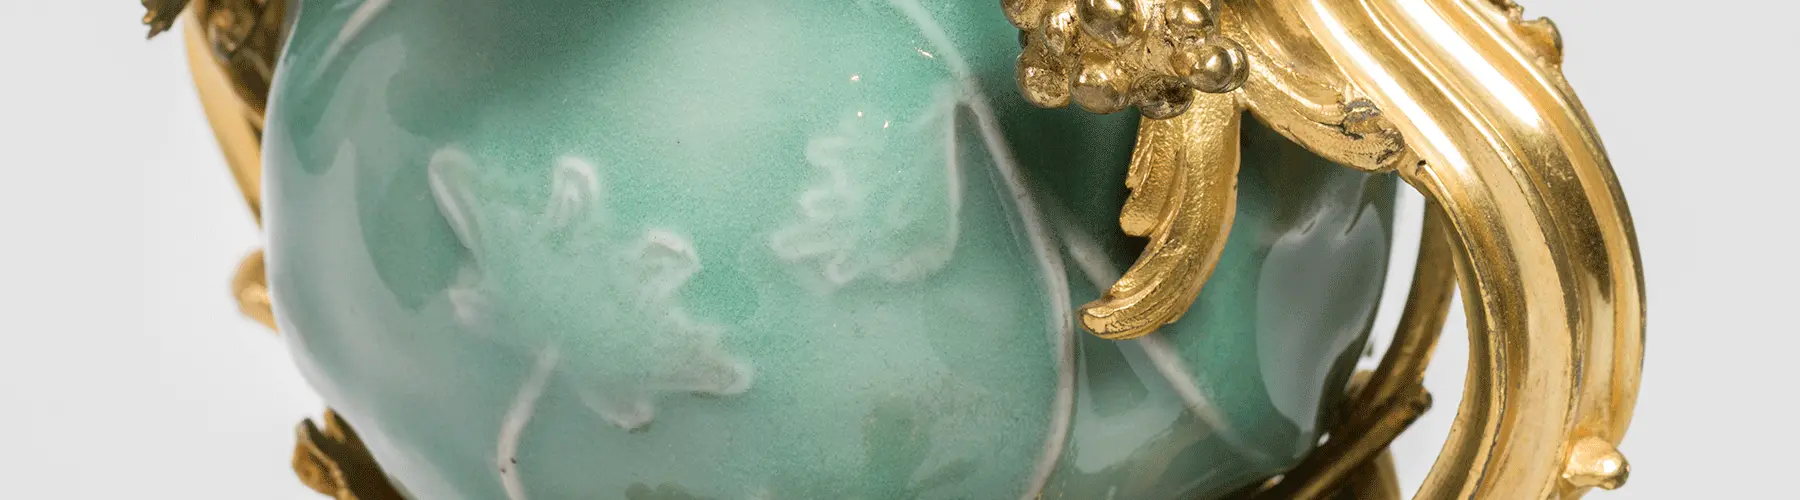 close up of green jade vase with gold details